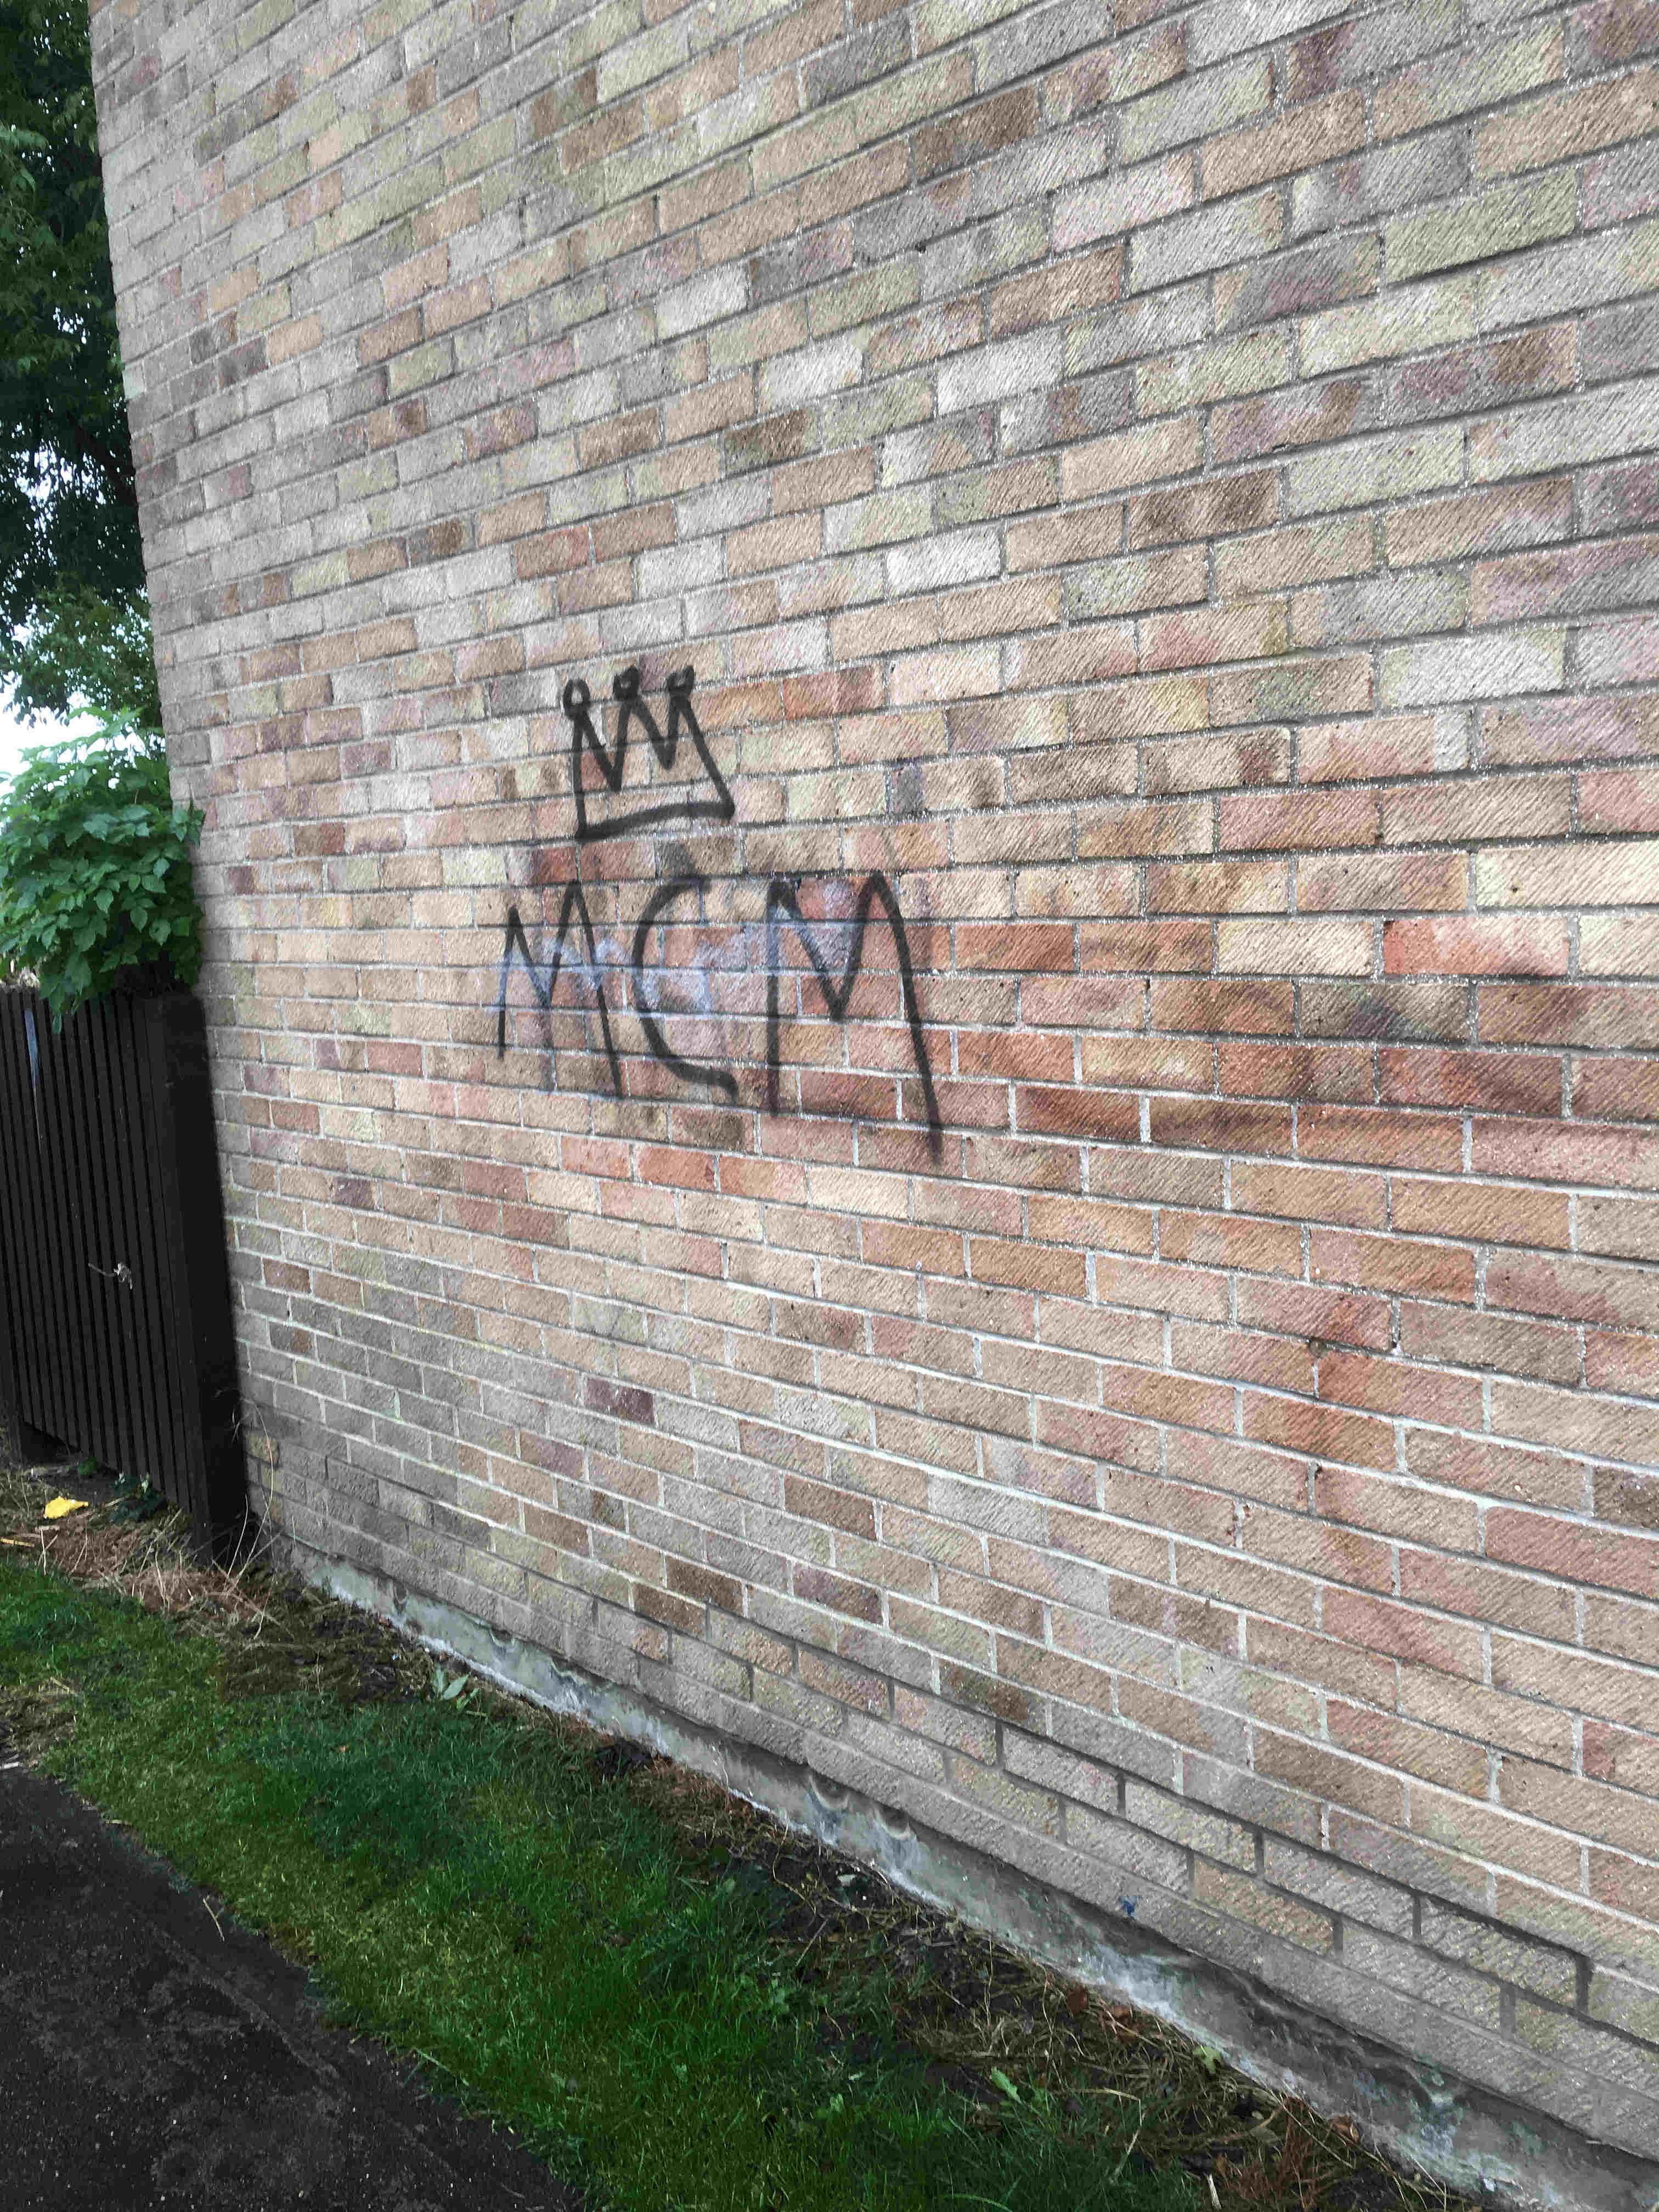 While nearby we asked for graffiti to be removed from the gable ends of two houses